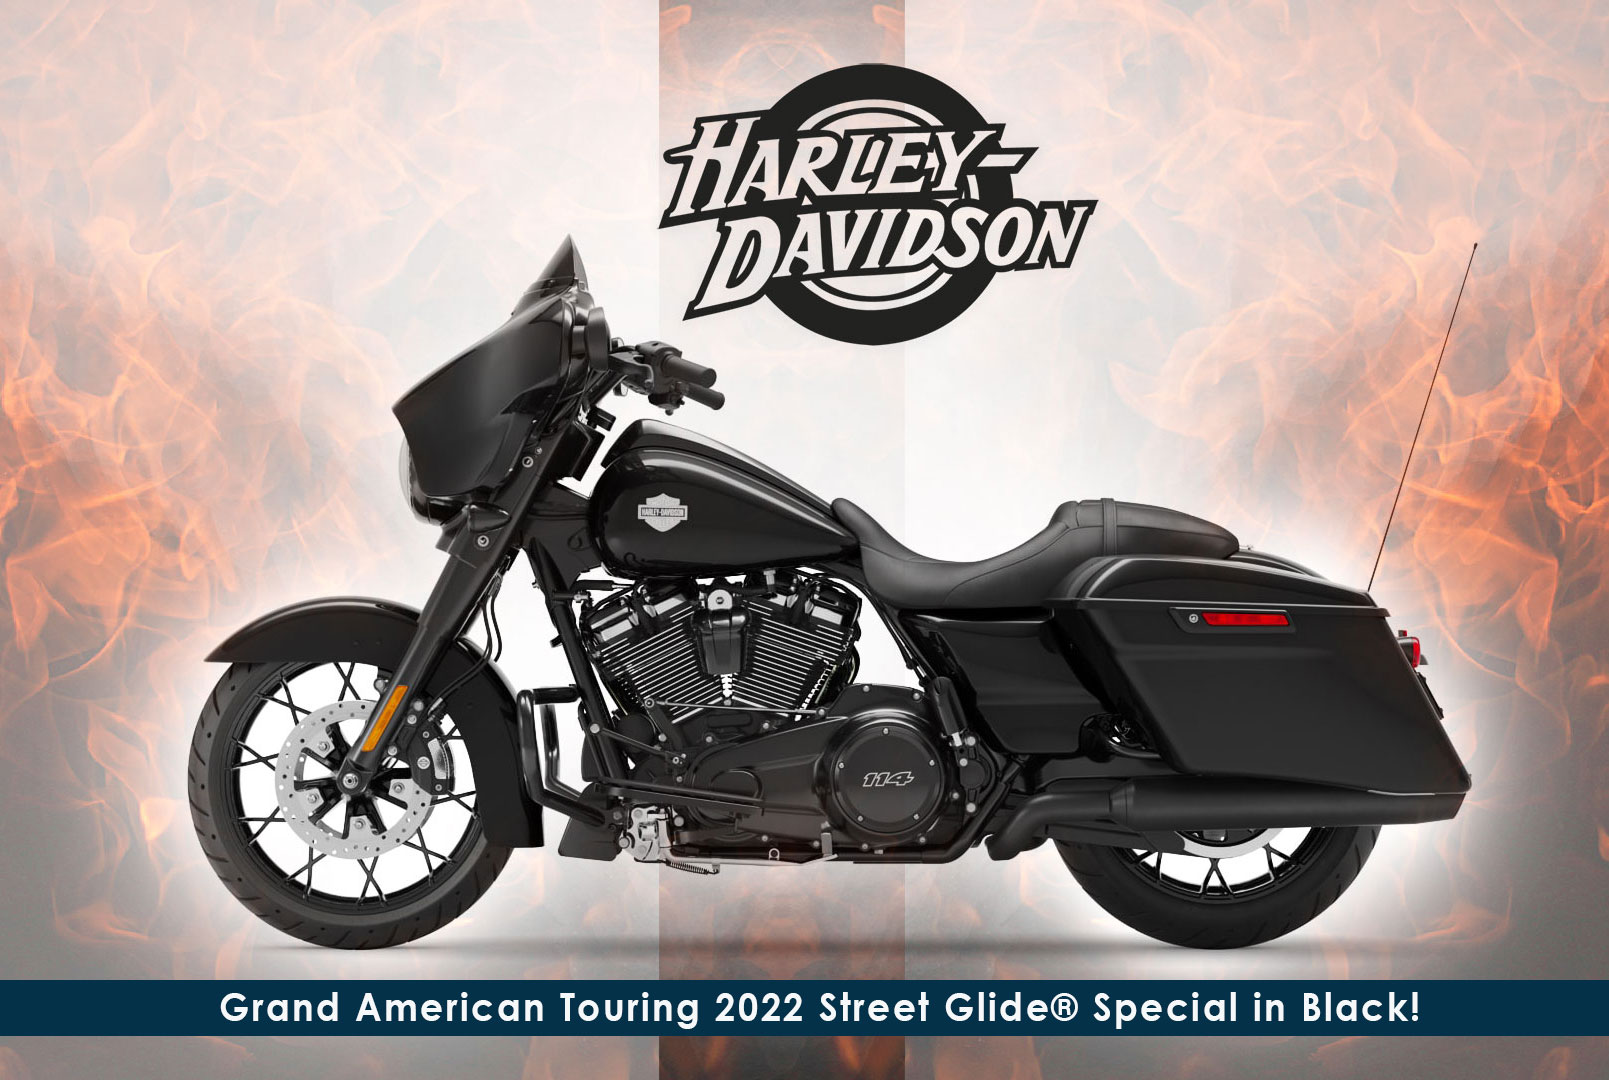 Get Dad a Harley Bike Raffle Ticket for Father’s Day While Supporting LEOs!